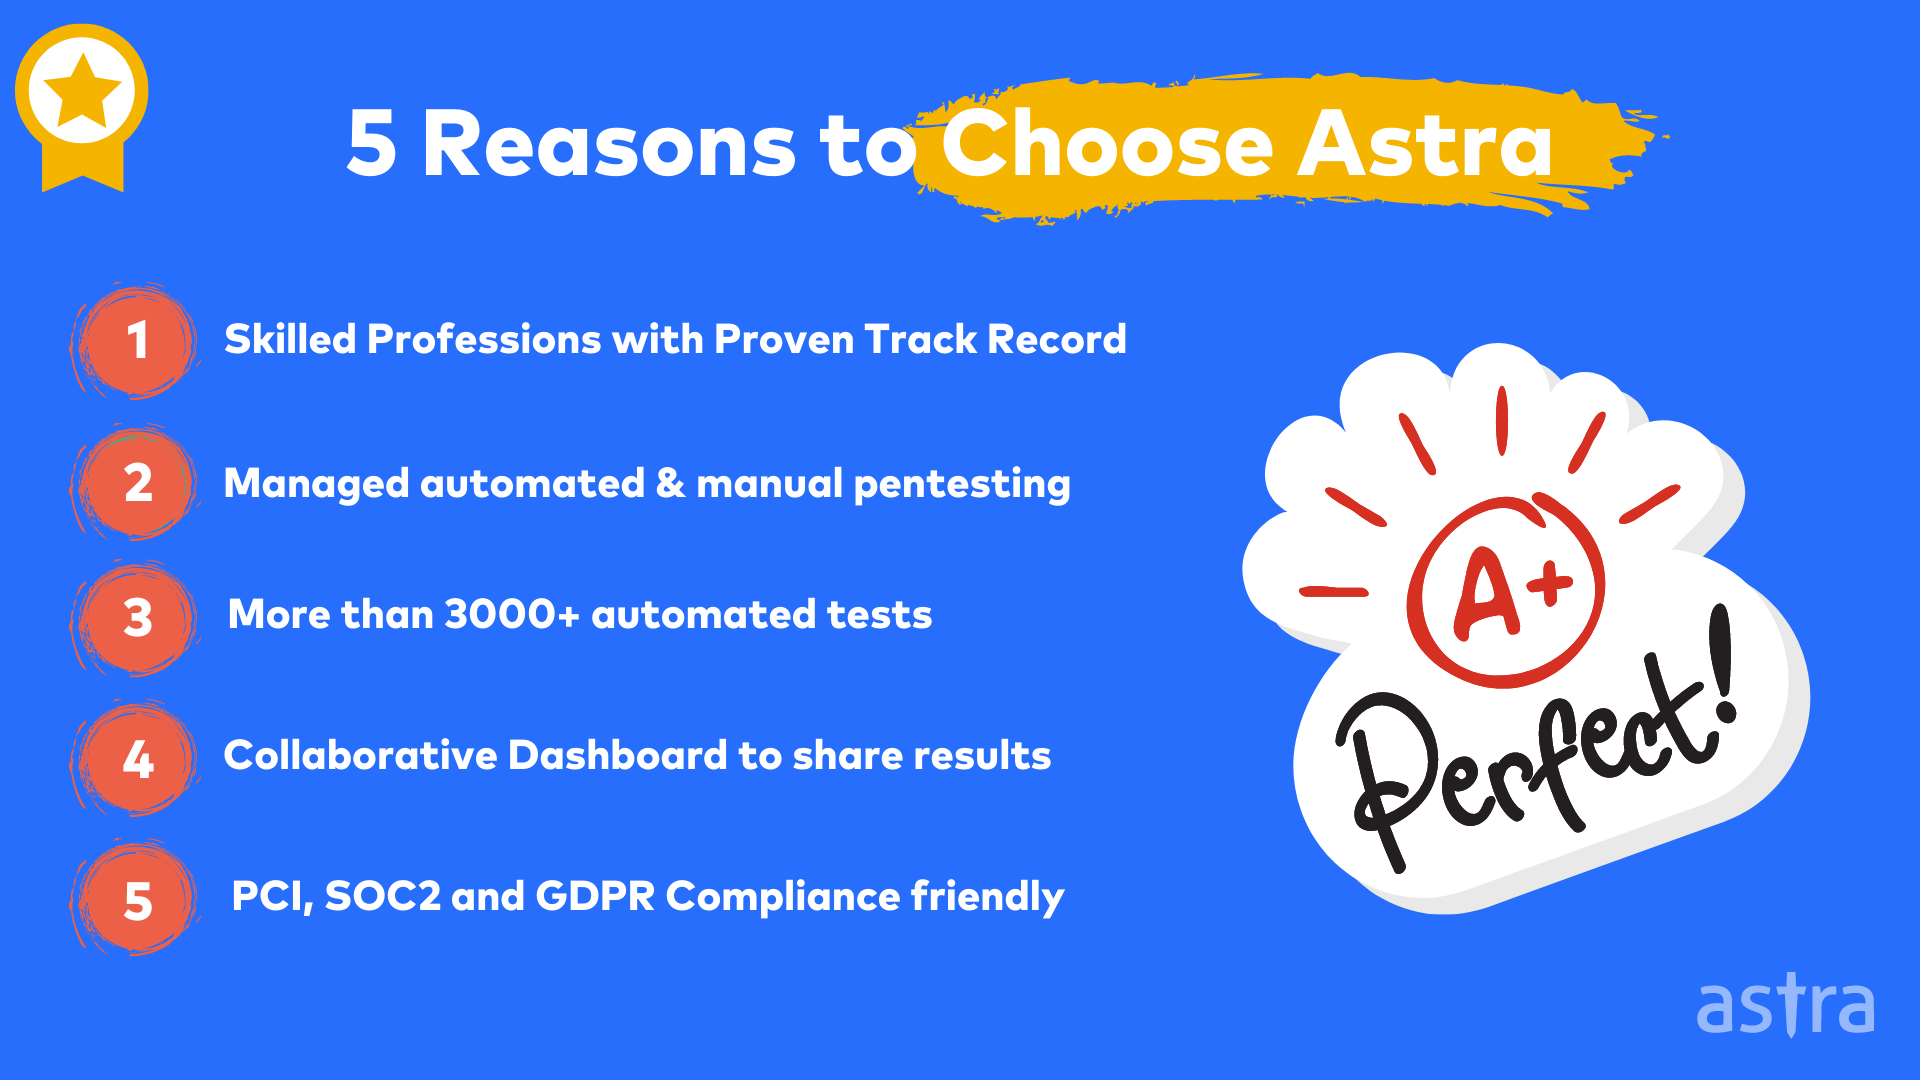 Why Choose Astra?